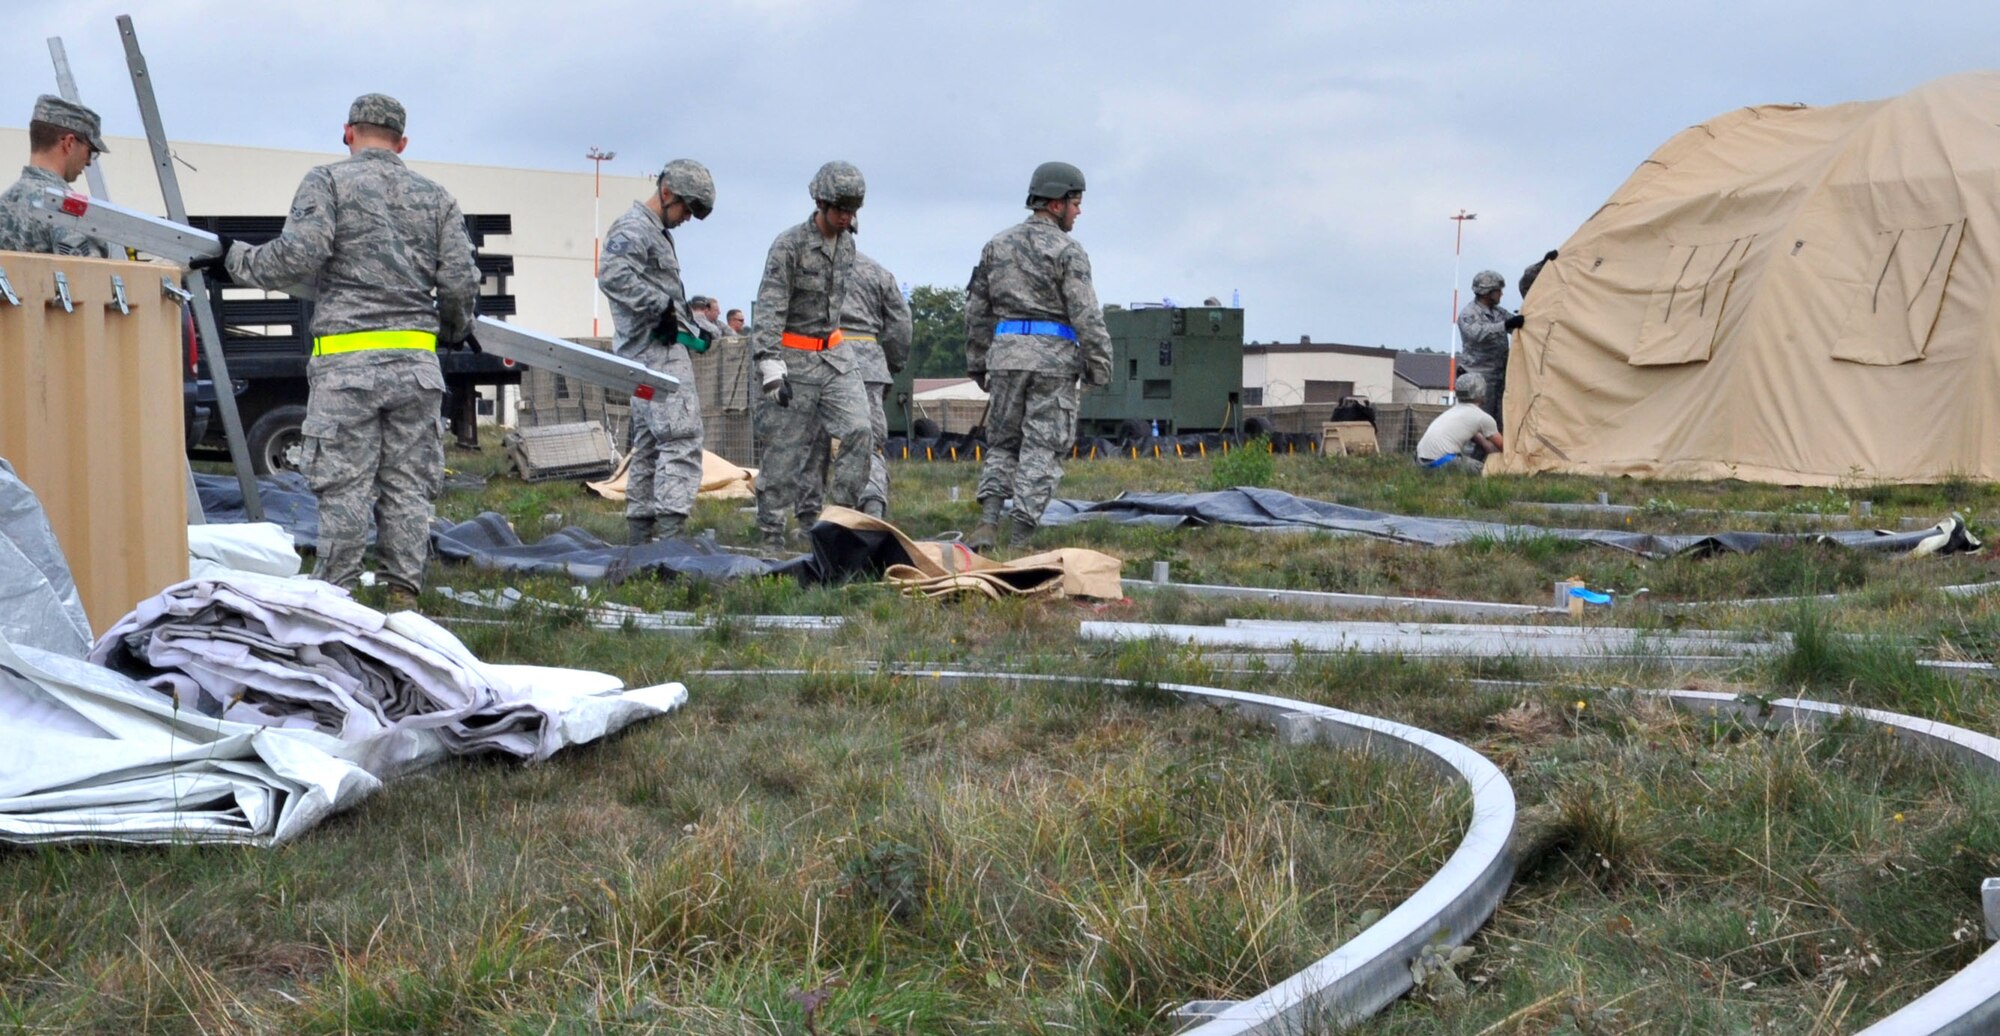 U.S. Air Force 786th Civil Engineer Squadron personnel participate in a simulated 'bed-down' during the Operational Readiness Inspection, Ramstein Air Base, Germany, Oct. 1, 2010. The ORI is designed to test Airmen's ability to survive, operate and perform fundamental duties in a war time environment. (U.S. Air Force photo by Airman 1st Class Desiree Esposito/Released)